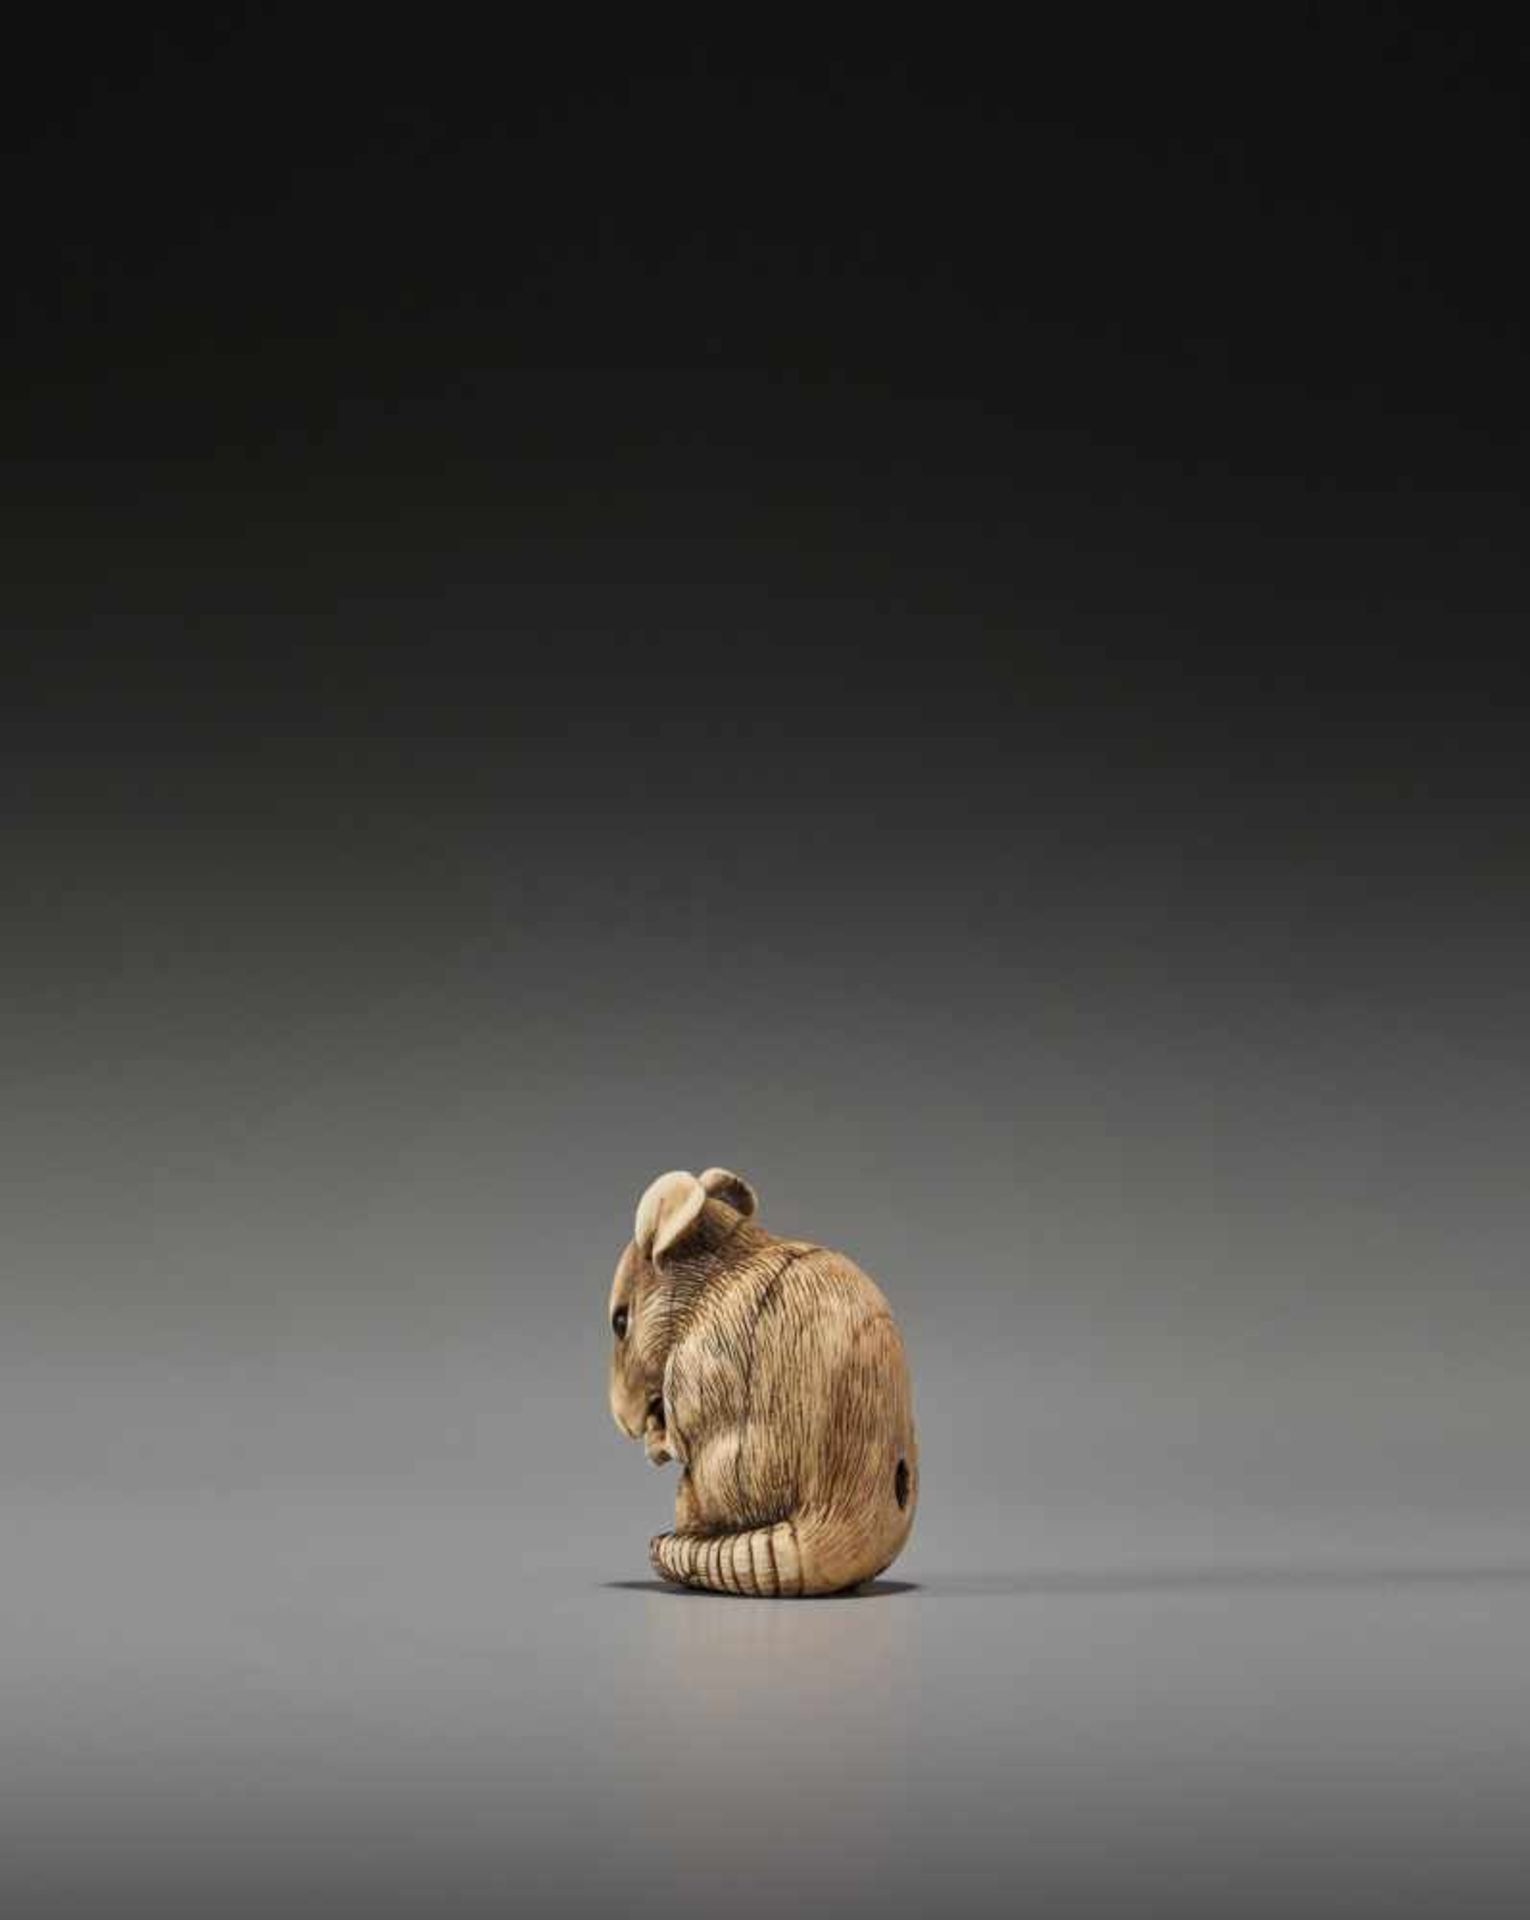 A POWERFUL KYOTO SCHOOL IVORY NETSUKE OF A RAT WITH A BEAN POD - Image 7 of 11